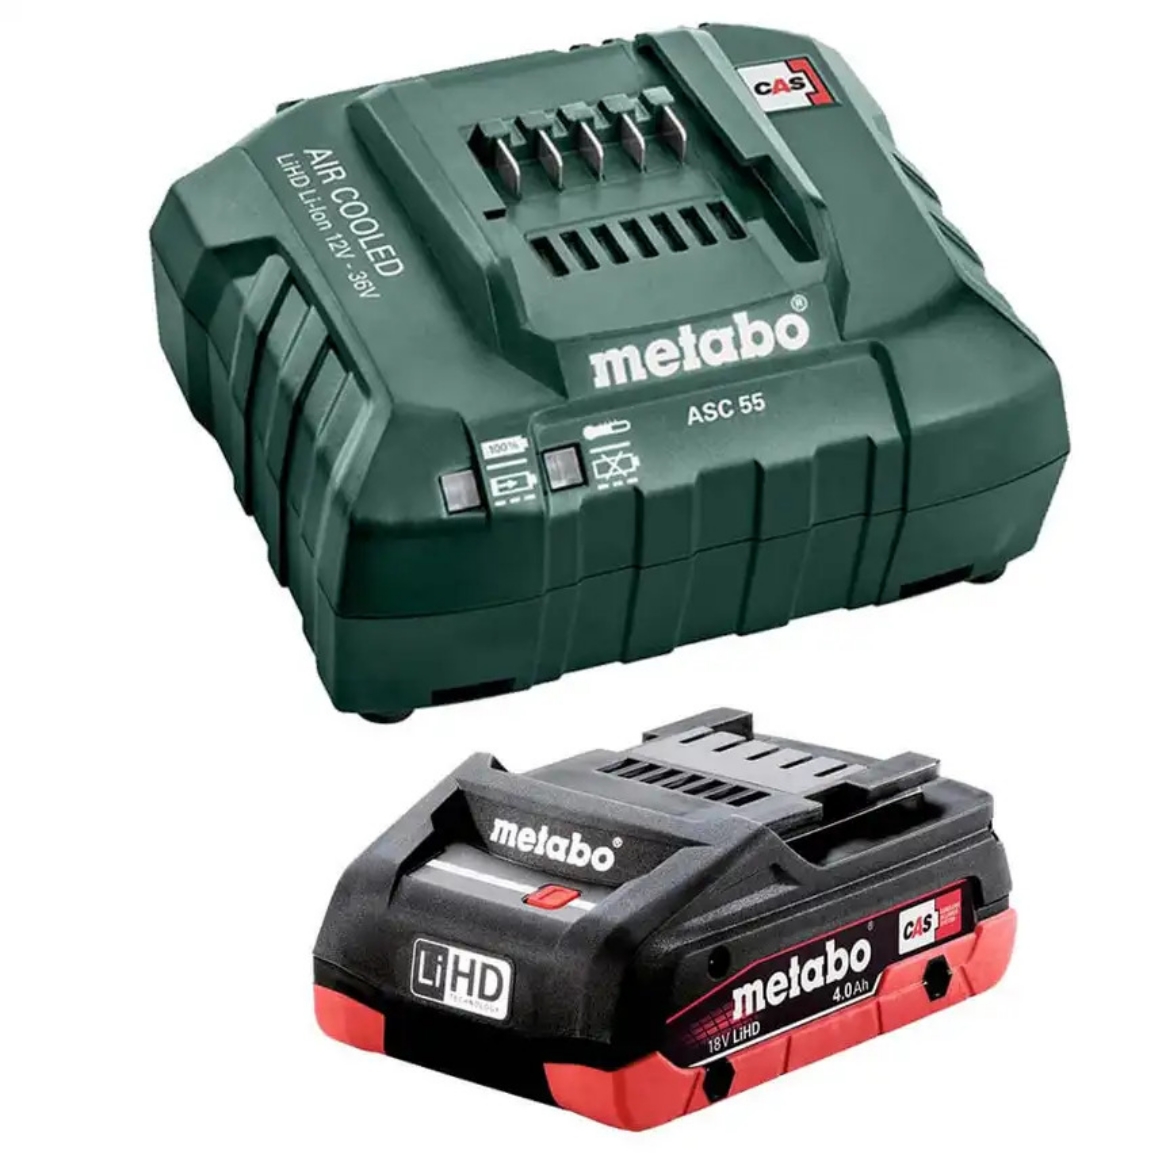 Picture of METABO 18V LIHD STARTER PACK (1 X 18V 4.0AH LIHD BATTERY & 1 X ASC 55 AIR-COOLED CHARGER)